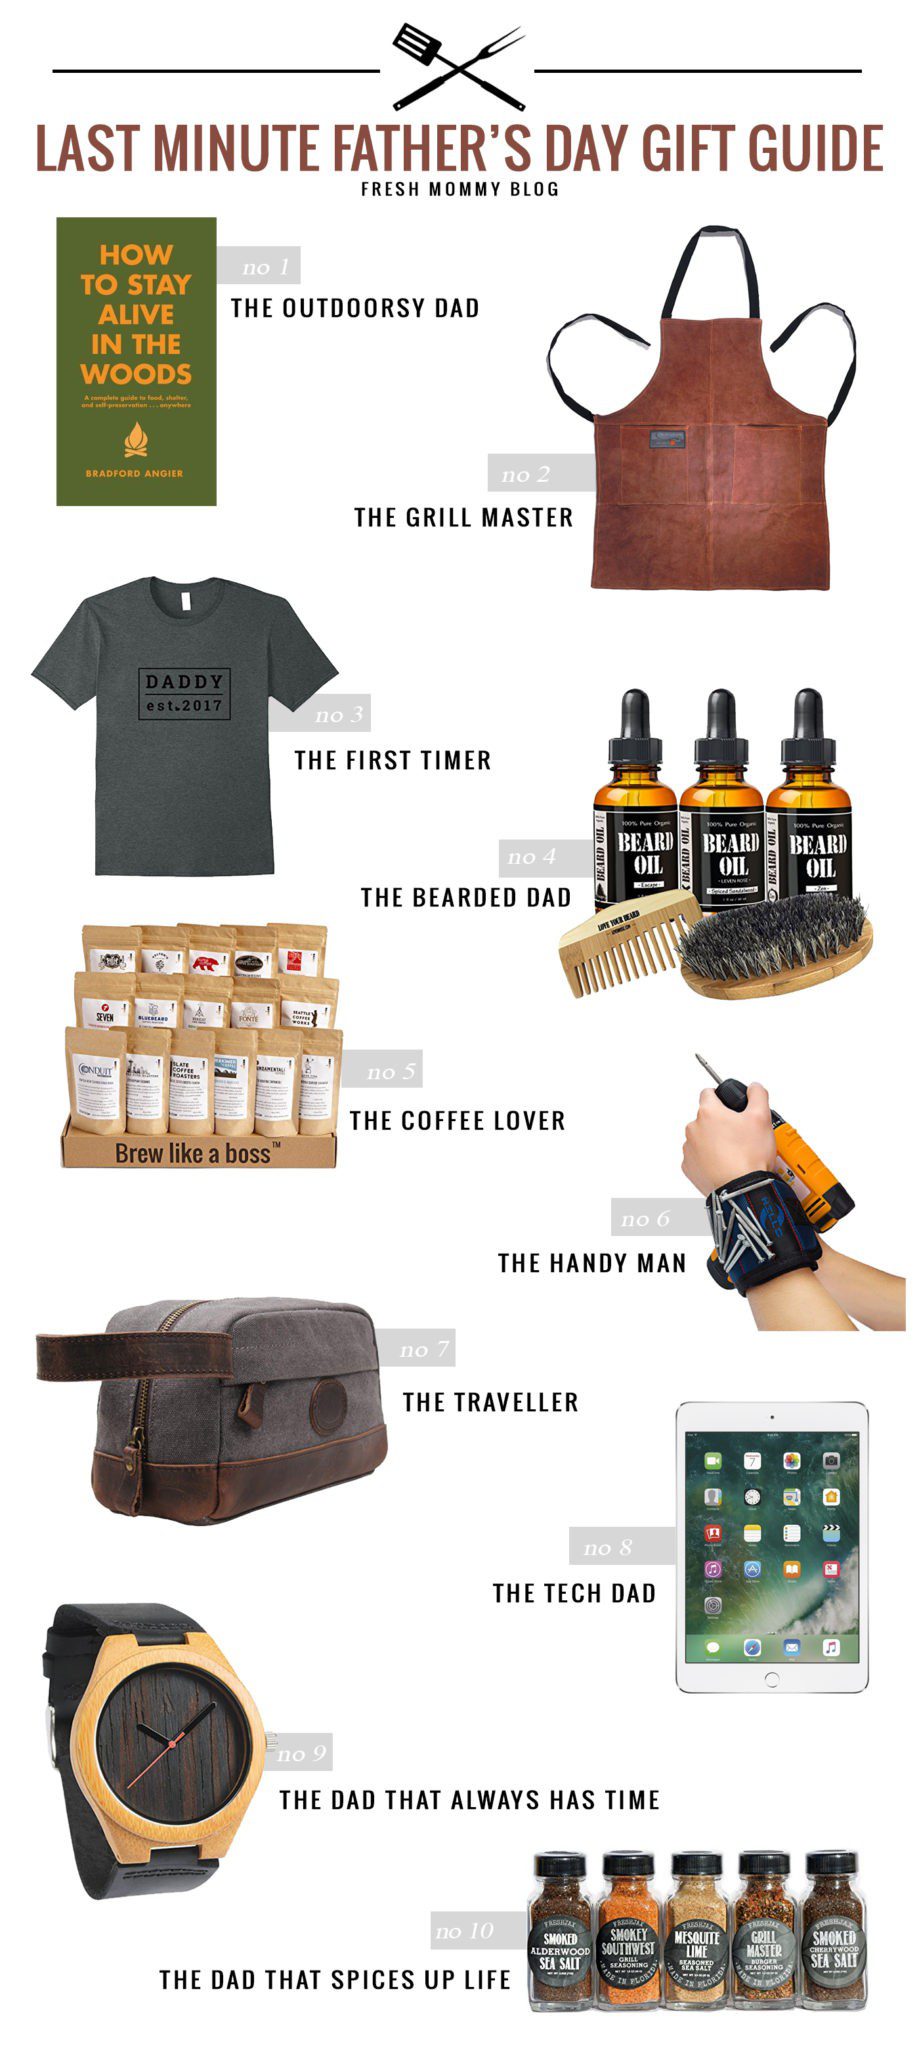 10 Impressive Last Minute Father's Day Gifts on  - Fresh